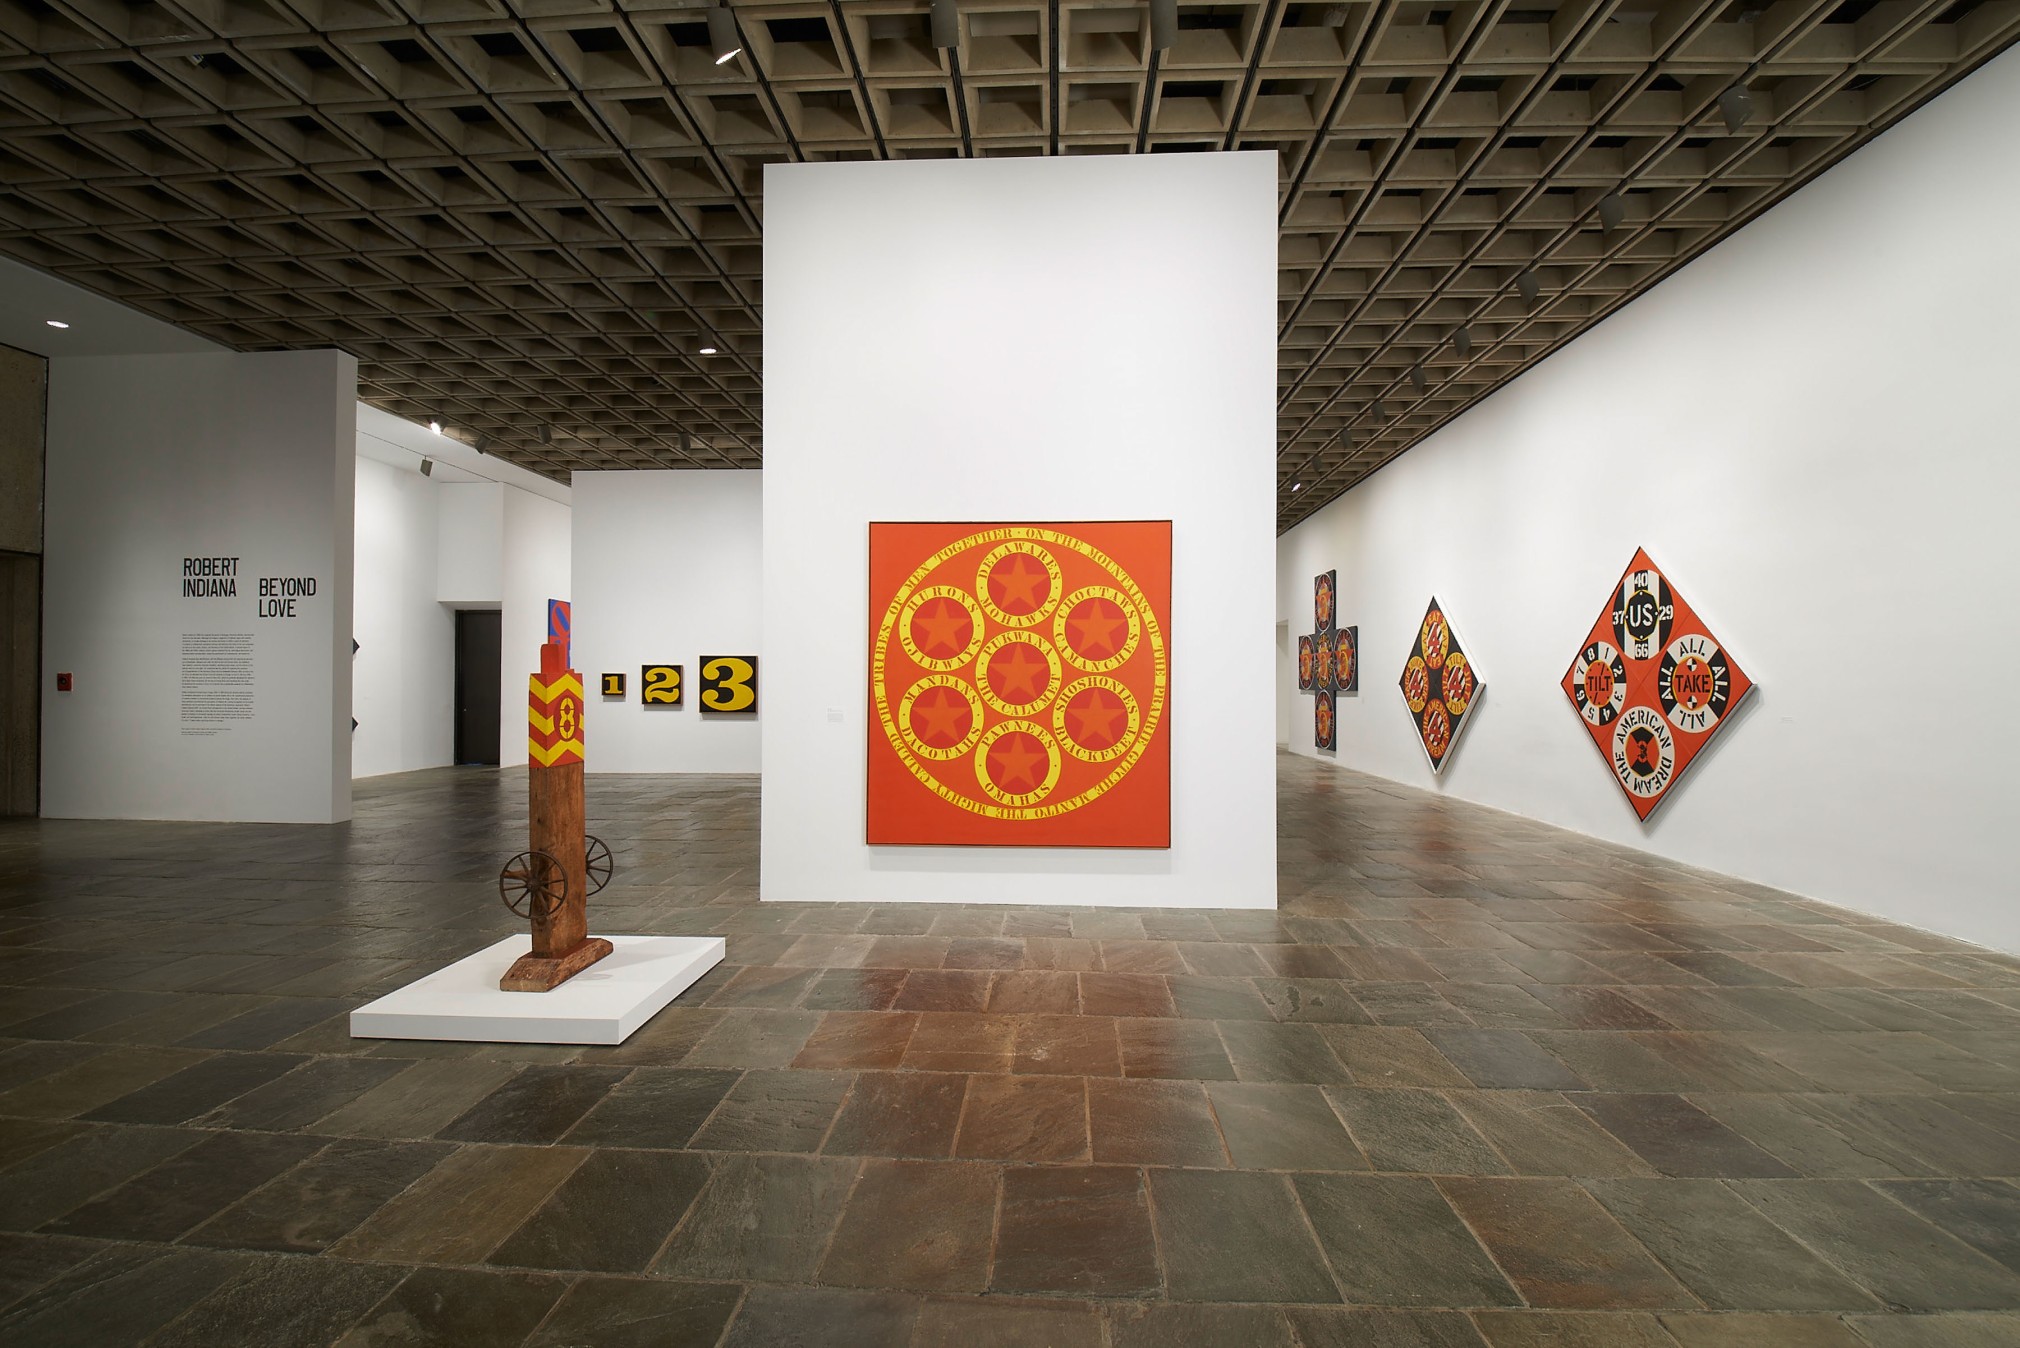 Installation view of&nbsp;Robert Indiana: Beyond LOVE, Whitney Museum of American Art, New York, September 26, 2013&ndash;January 5, 2014 featuring one wooden sculpture and five paintings.